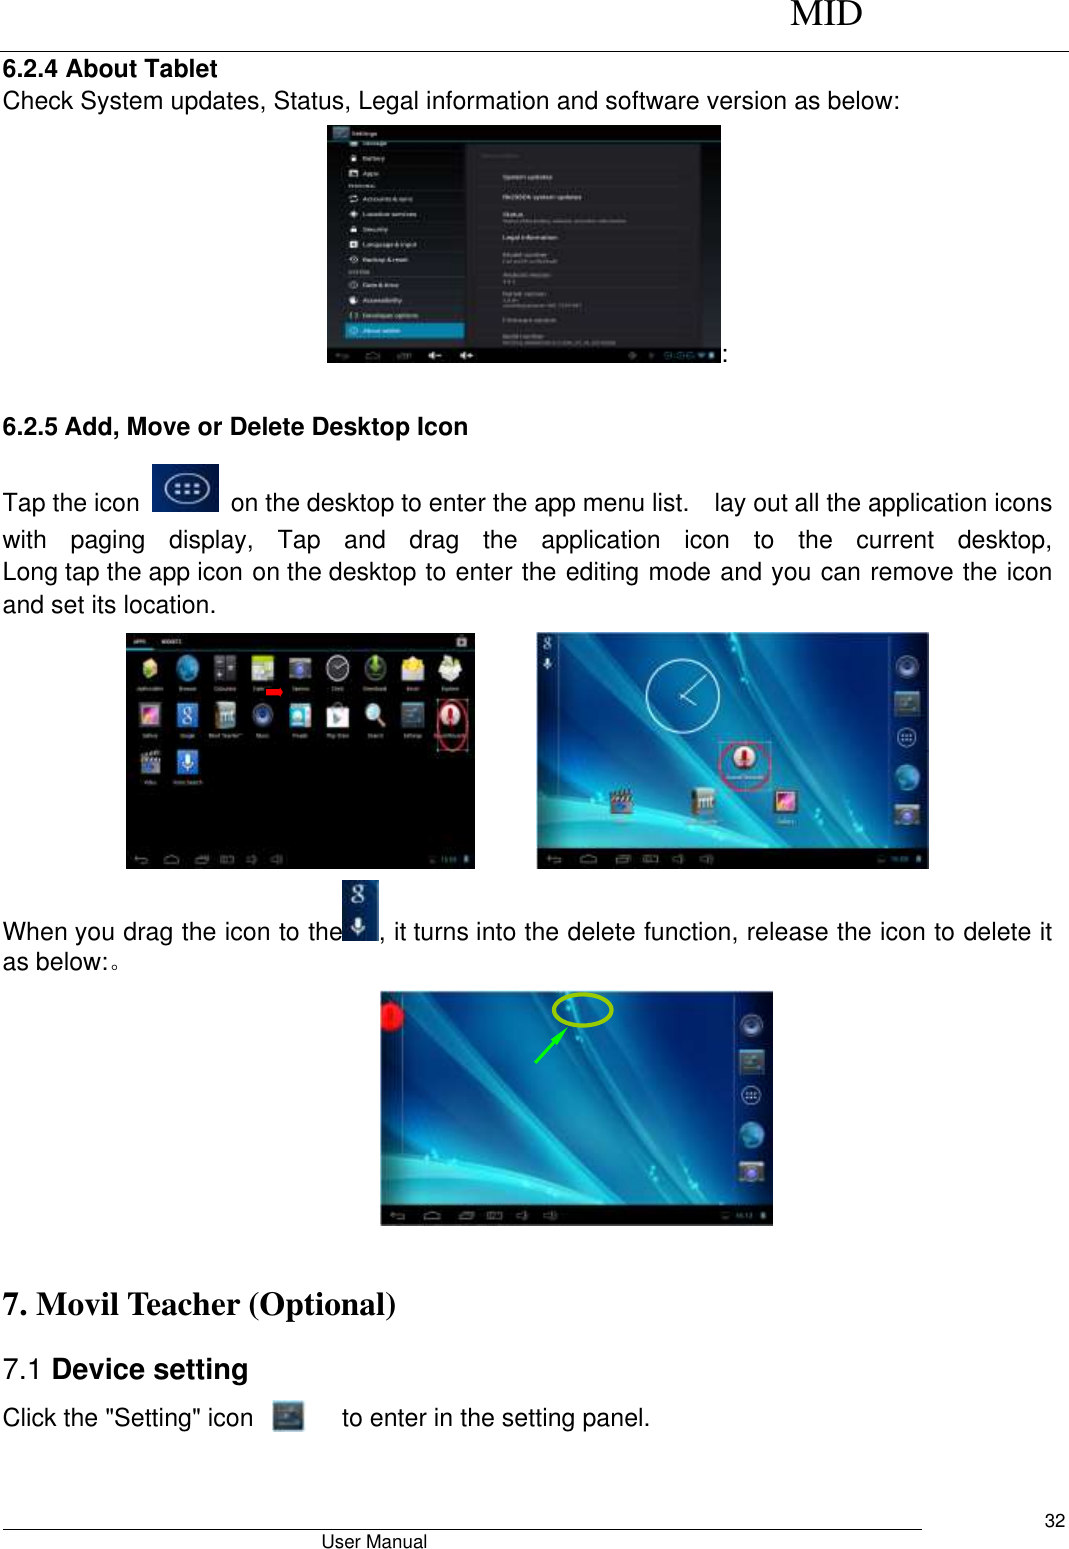      MID                                        User Manual     32 6.2.4 About Tablet Check System updates, Status, Legal information and software version as below: : 6.2.5 Add, Move or Delete Desktop Icon Tap the icon    on the desktop to enter the app menu list.    lay out all the application icons with  paging  display,  Tap  and  drag  the  application  icon  to  the  current  desktop, Long tap the app icon on the desktop to enter the editing mode and you can remove the icon and set its location.        When you drag the icon to the , it turns into the delete function, release the icon to delete it as below:。   7. Movil Teacher (Optional)   7.1 Device setting Click the &quot;Setting&quot; icon               to enter in the setting panel. 